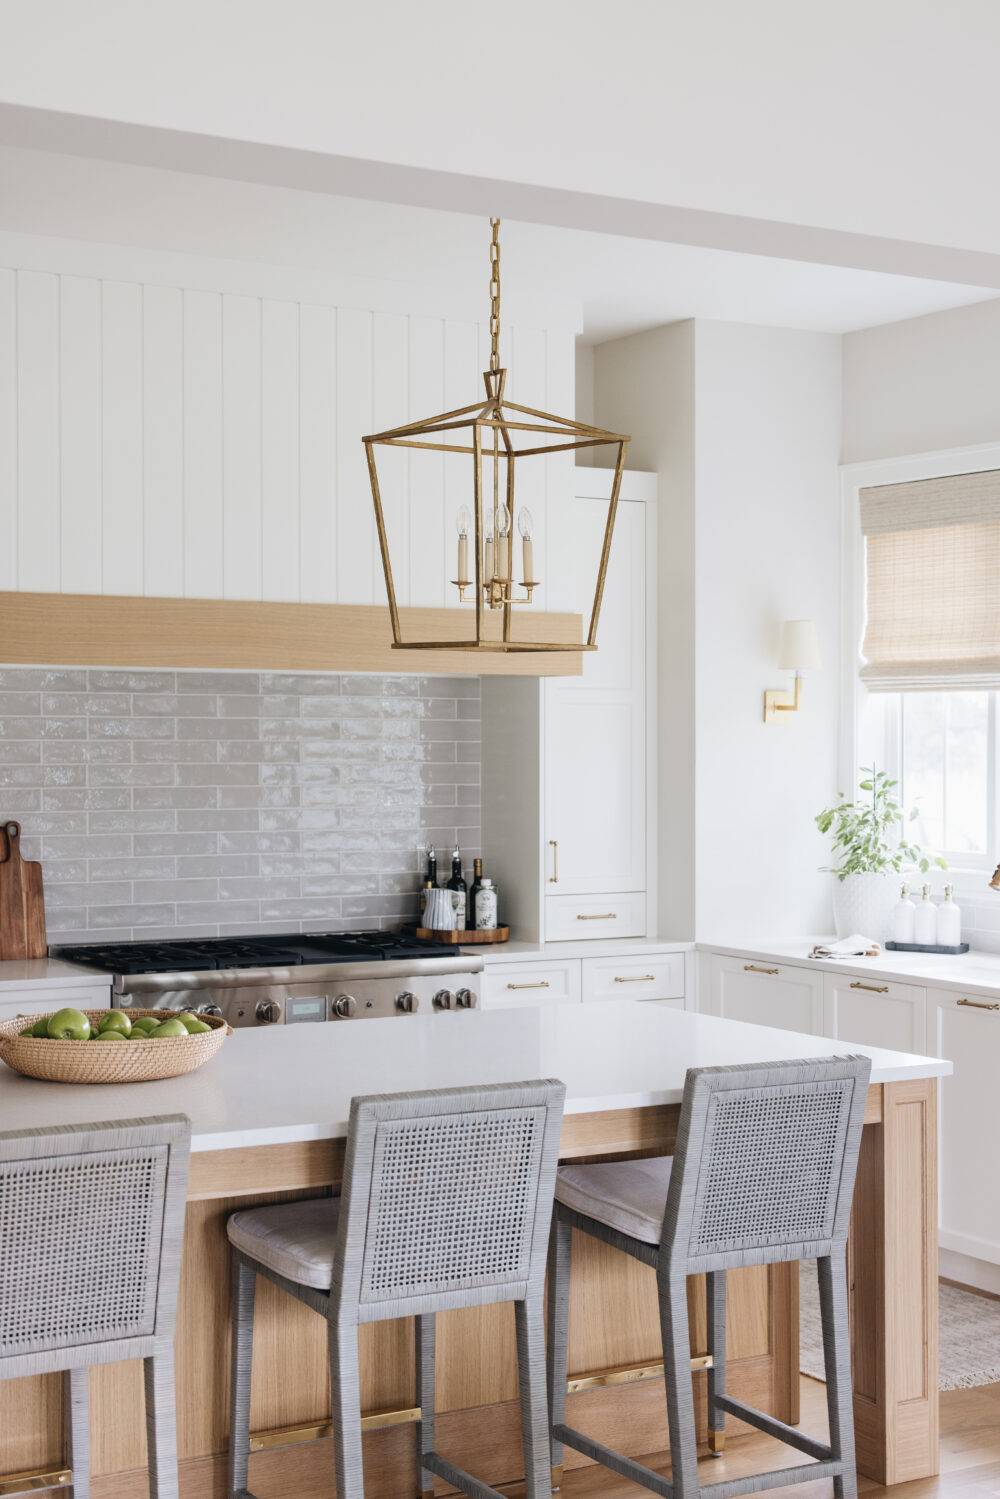 A kitchen with white cabinets and grey subway tile backsplash behind the stove. 